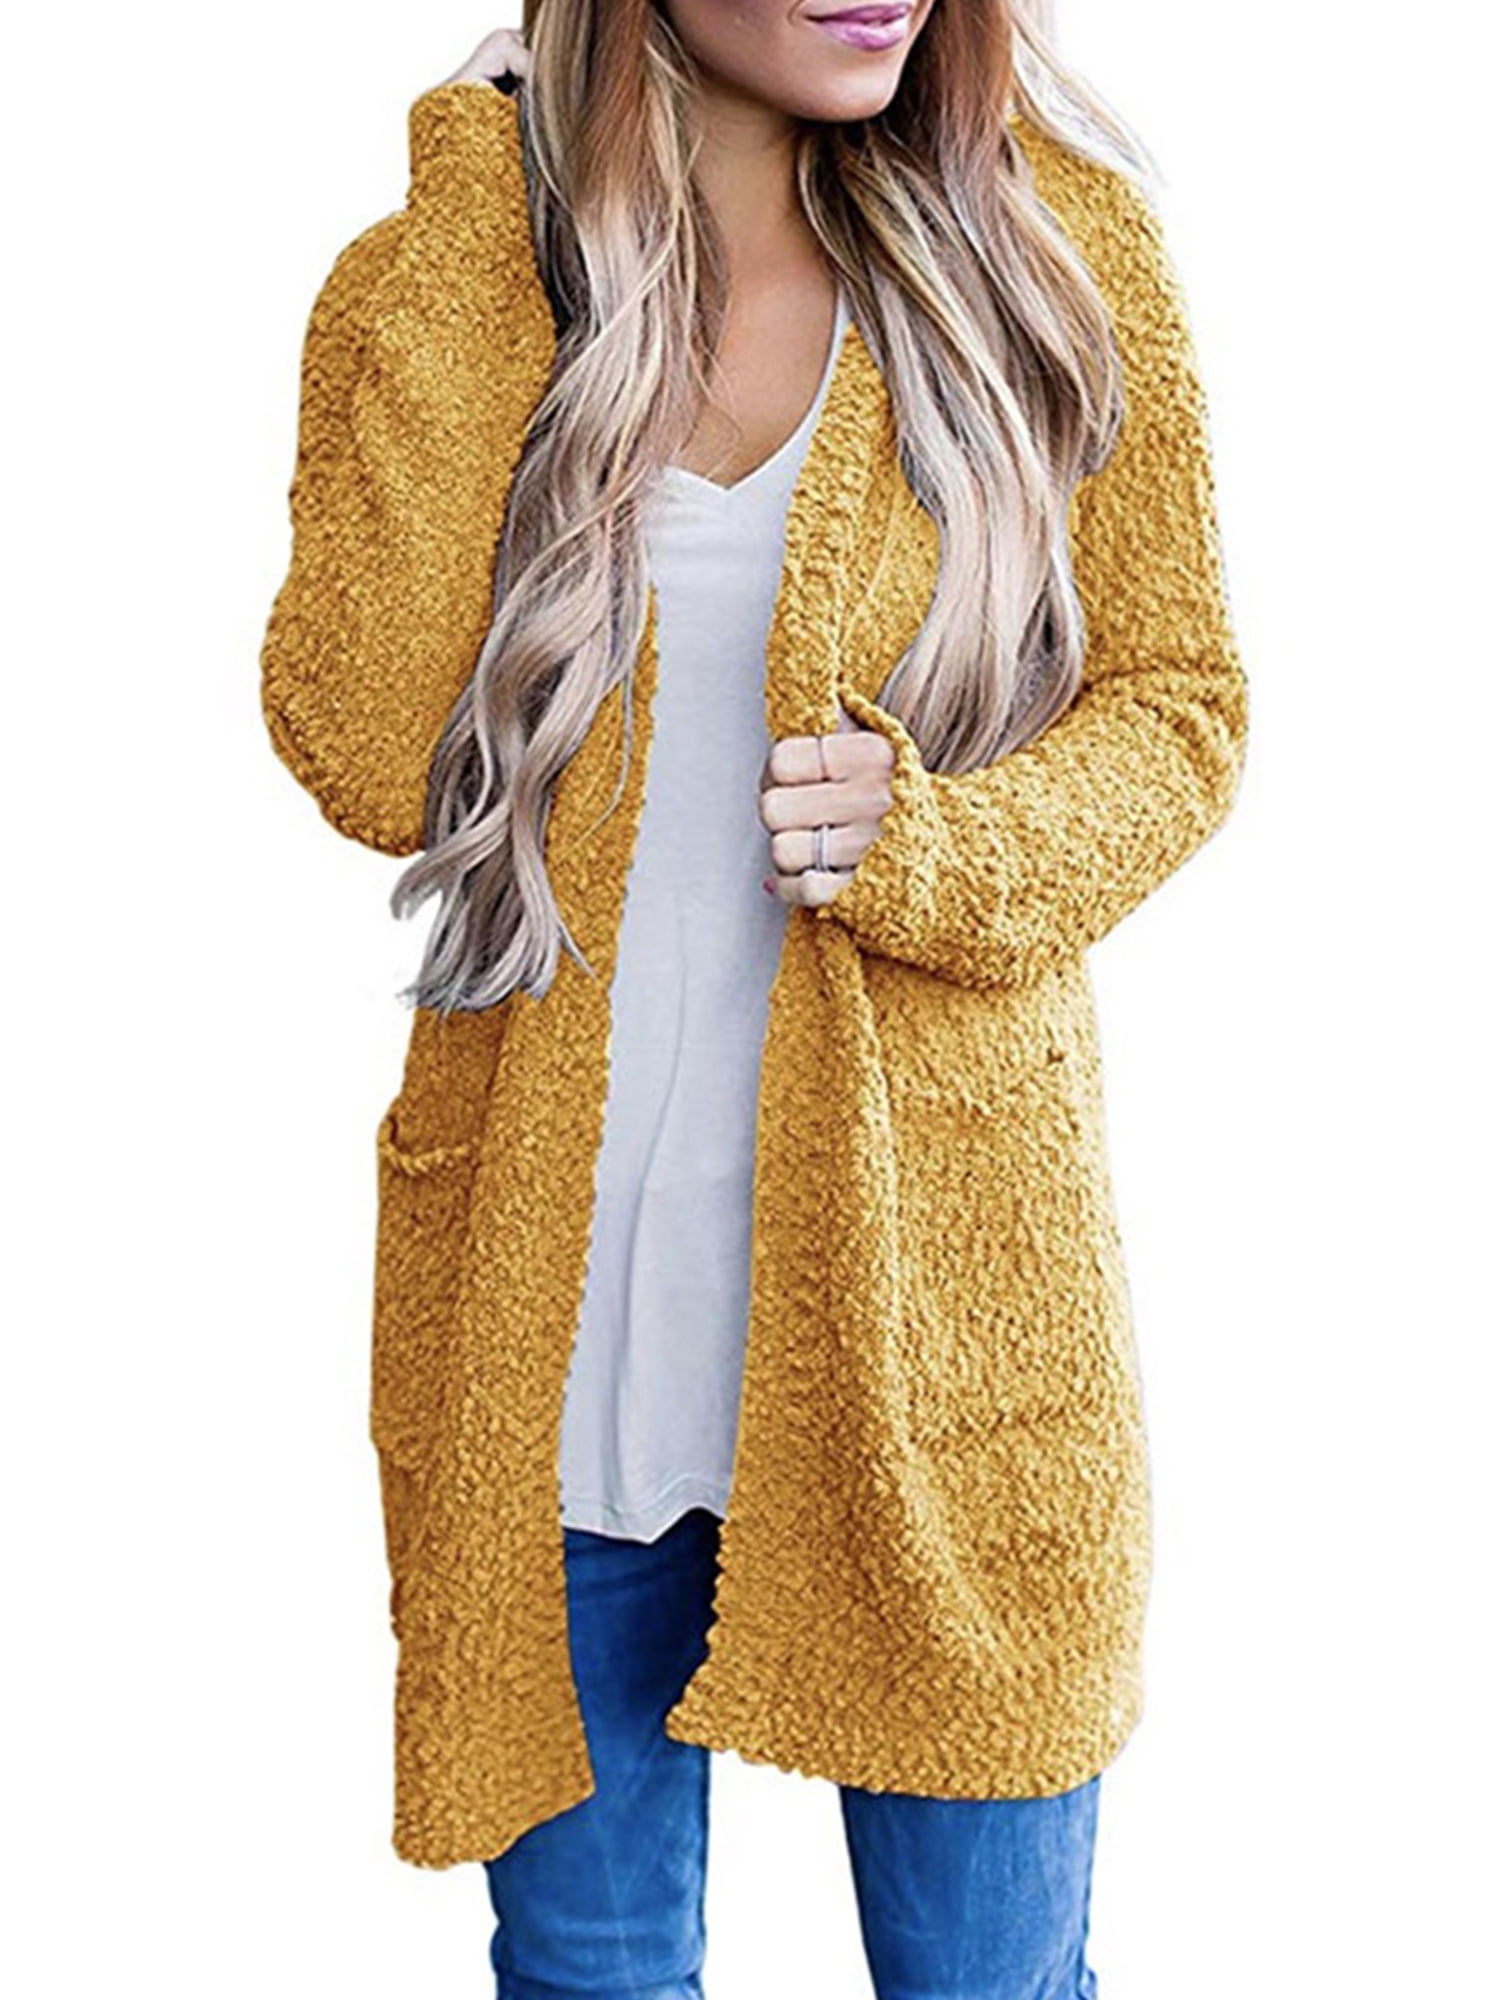 Baijiaye Open Front Cardigans Womens Baggy Knit Long Jumpers Jacket Lady Oversized Solid Slouchy Sweater Coat